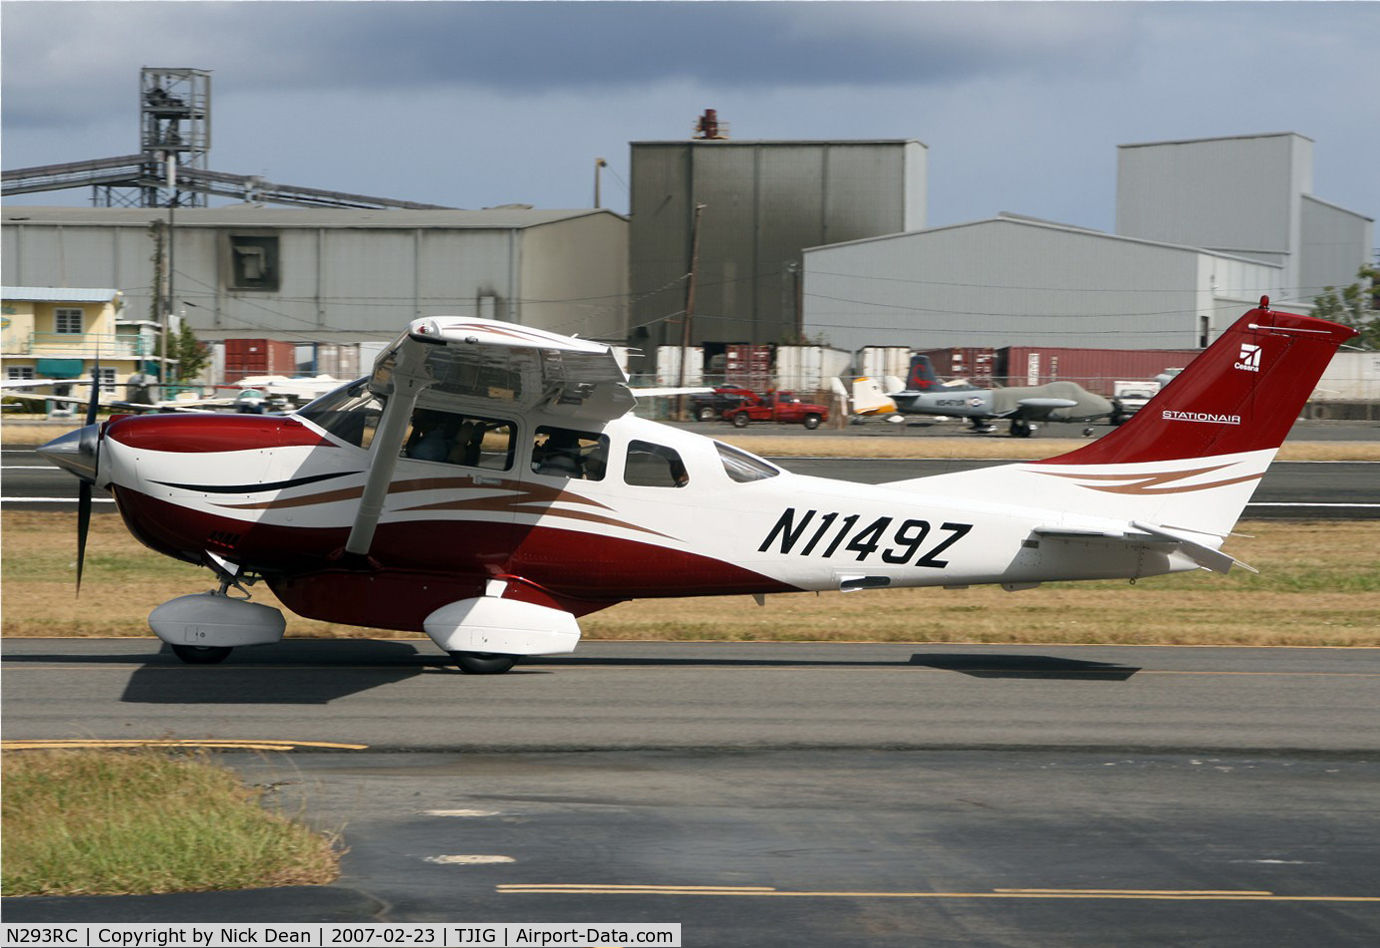 N293RC, 2006 Cessna 206H Stationair C/N 20608281, Shot as N1149Z but now reregistered as listed